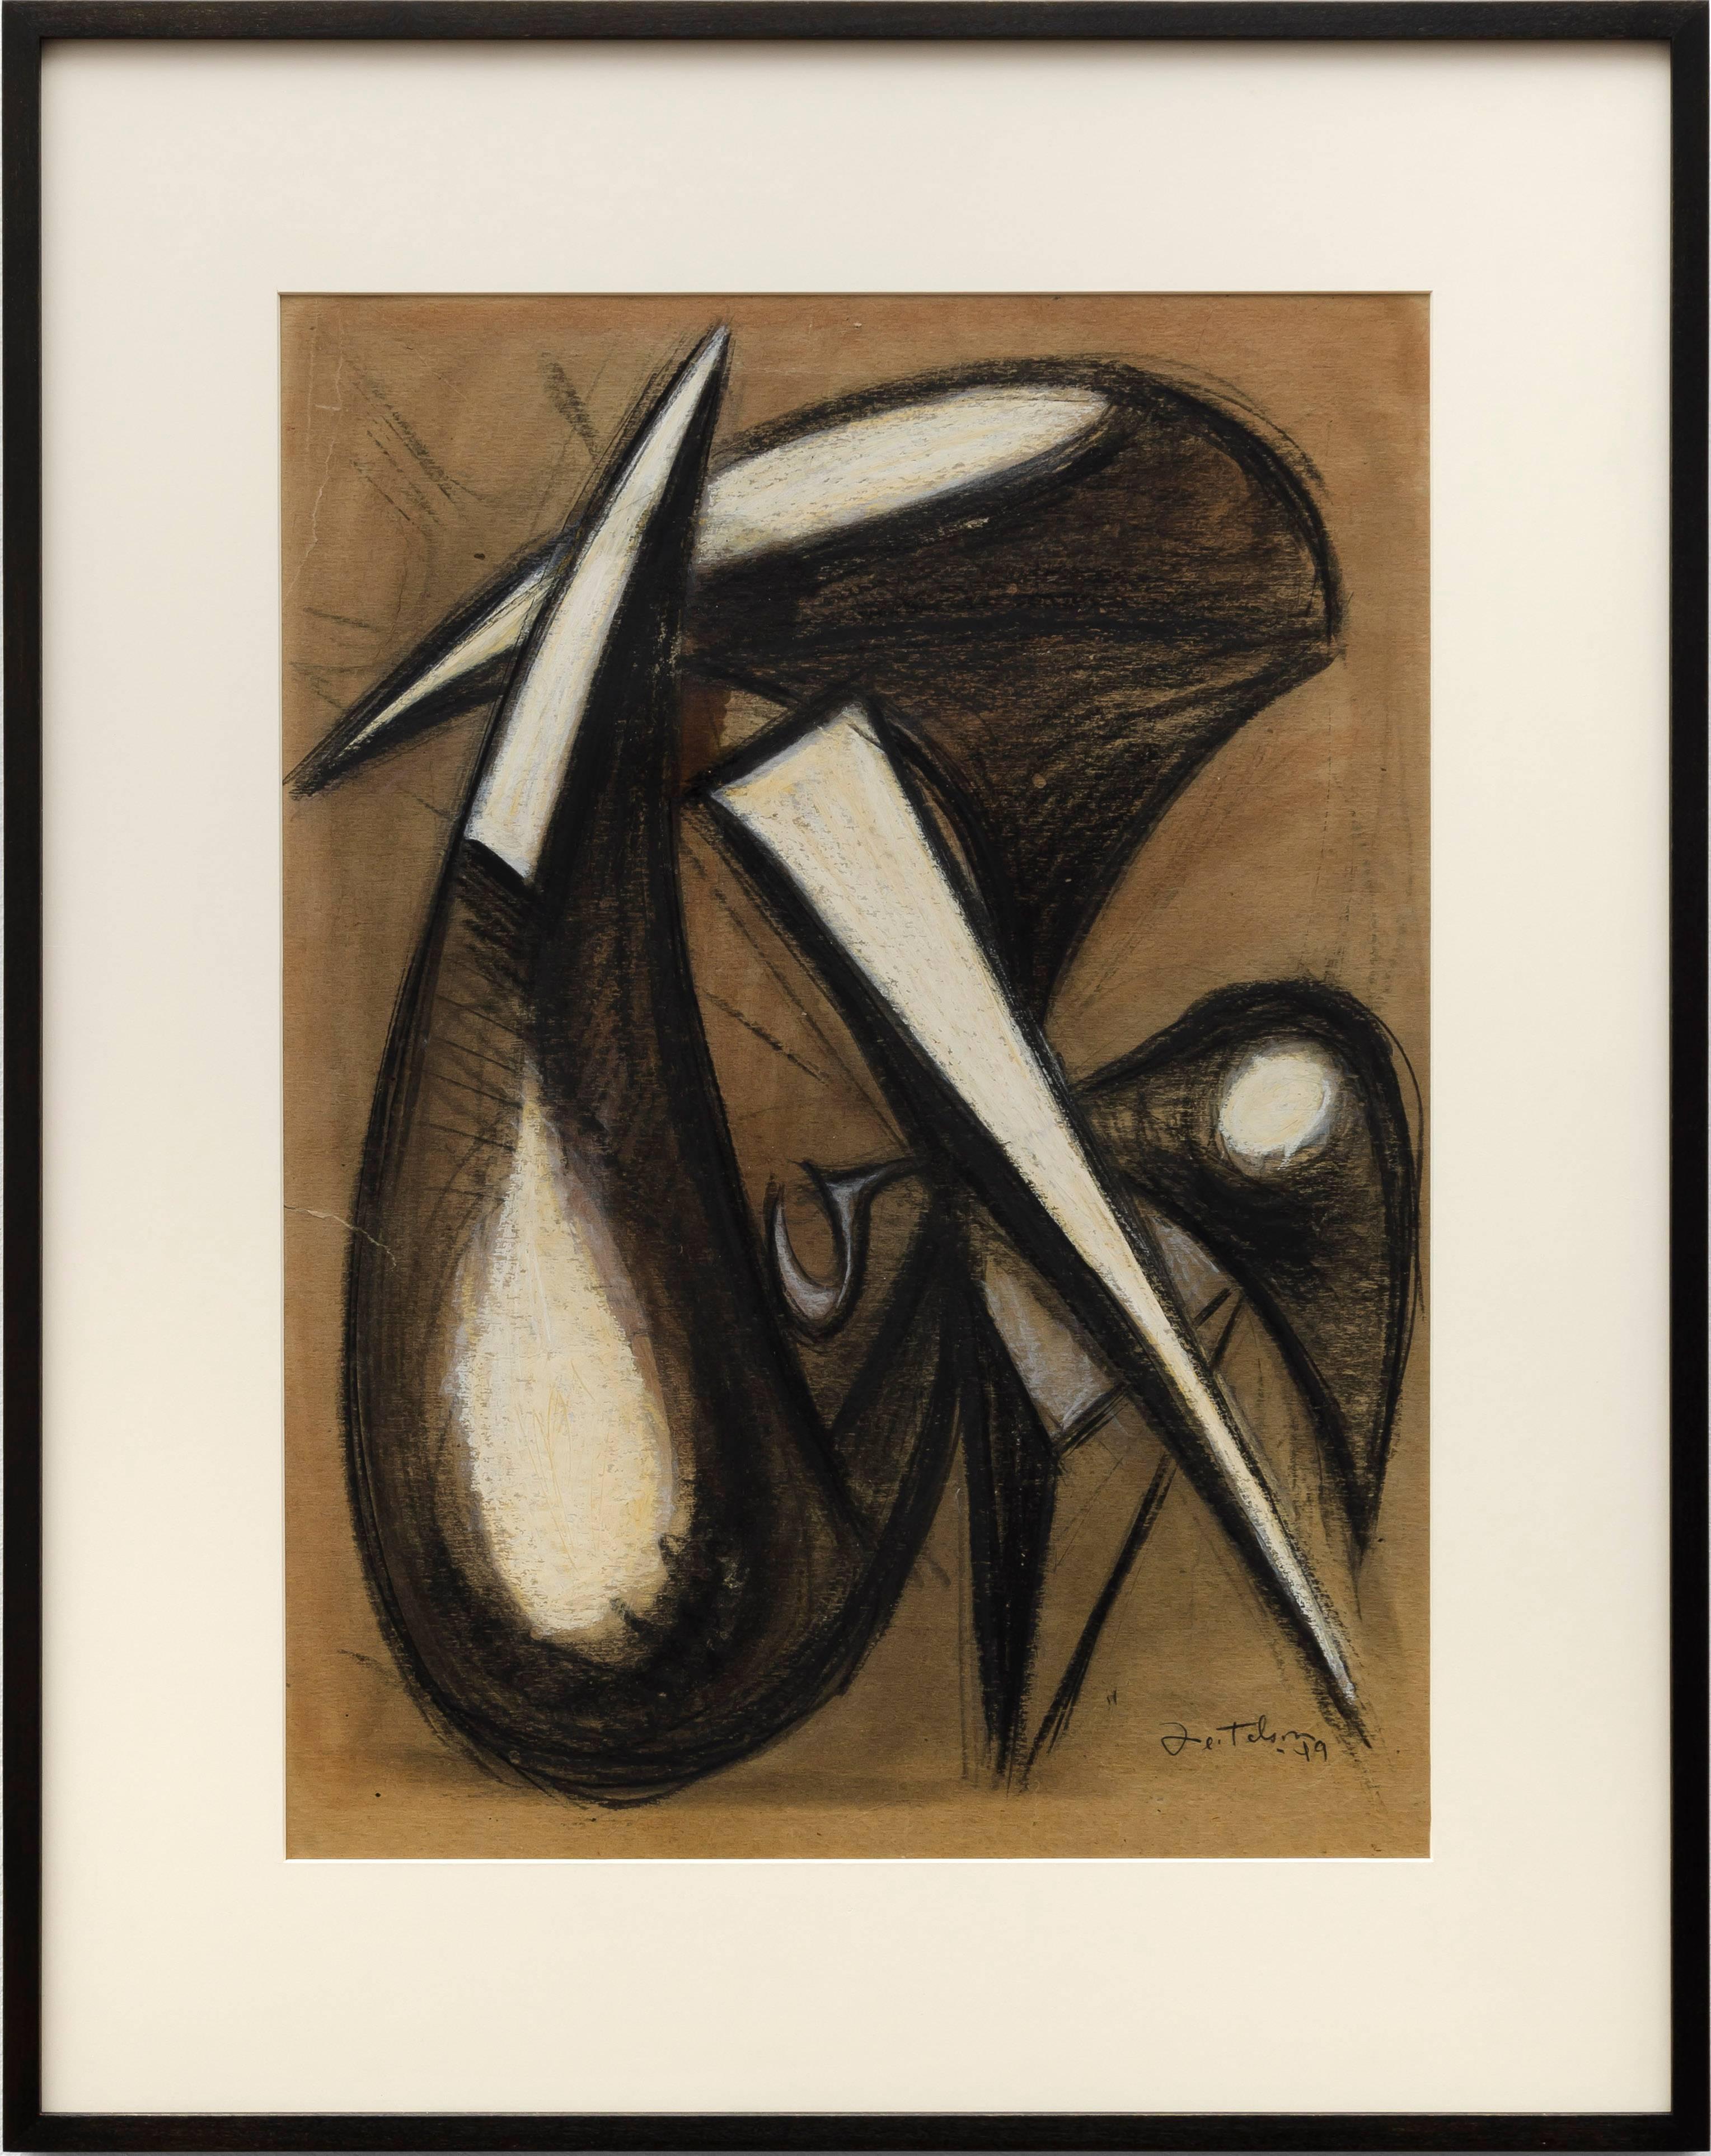 Lorser Feitelson Abstract Drawing - Untitled (Magical Forms: Prometheus), post-surreal drawing with morphing forms